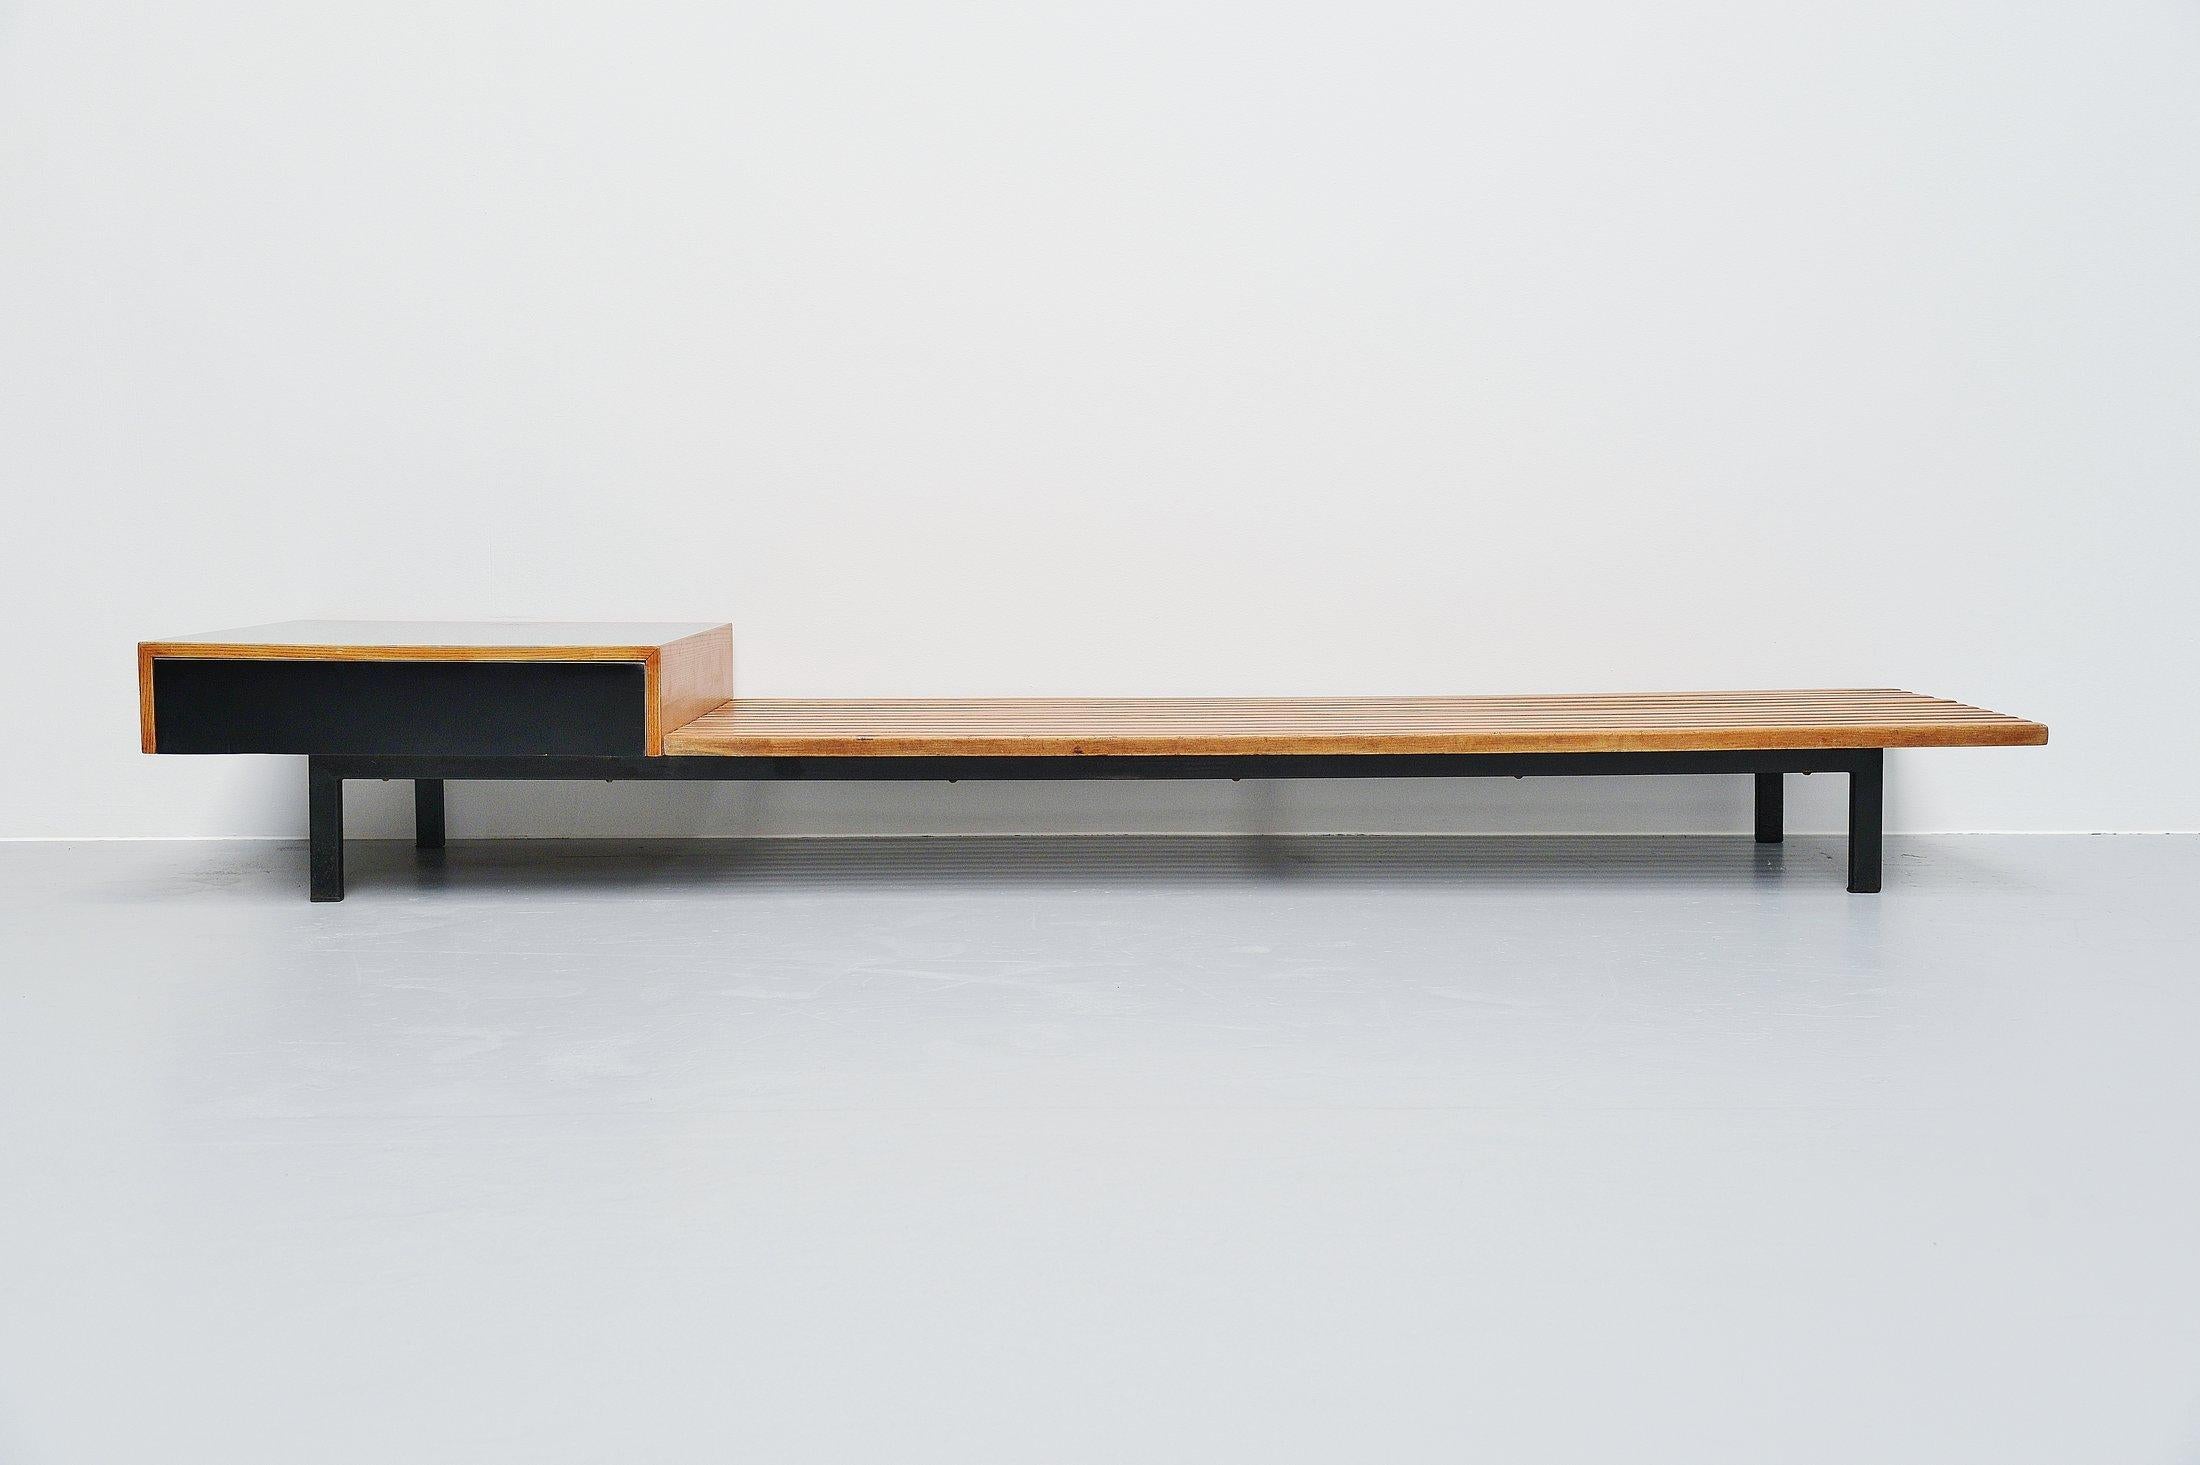 Fantastic large slat bench designed by Charlotte Perriand for the Cite Cansado, Mauritania, and manufactured by Steph Simon, circa 1958. This bench was made of solid teak wooden slats and has a black metal frame. This rare bench has a drawer unit on